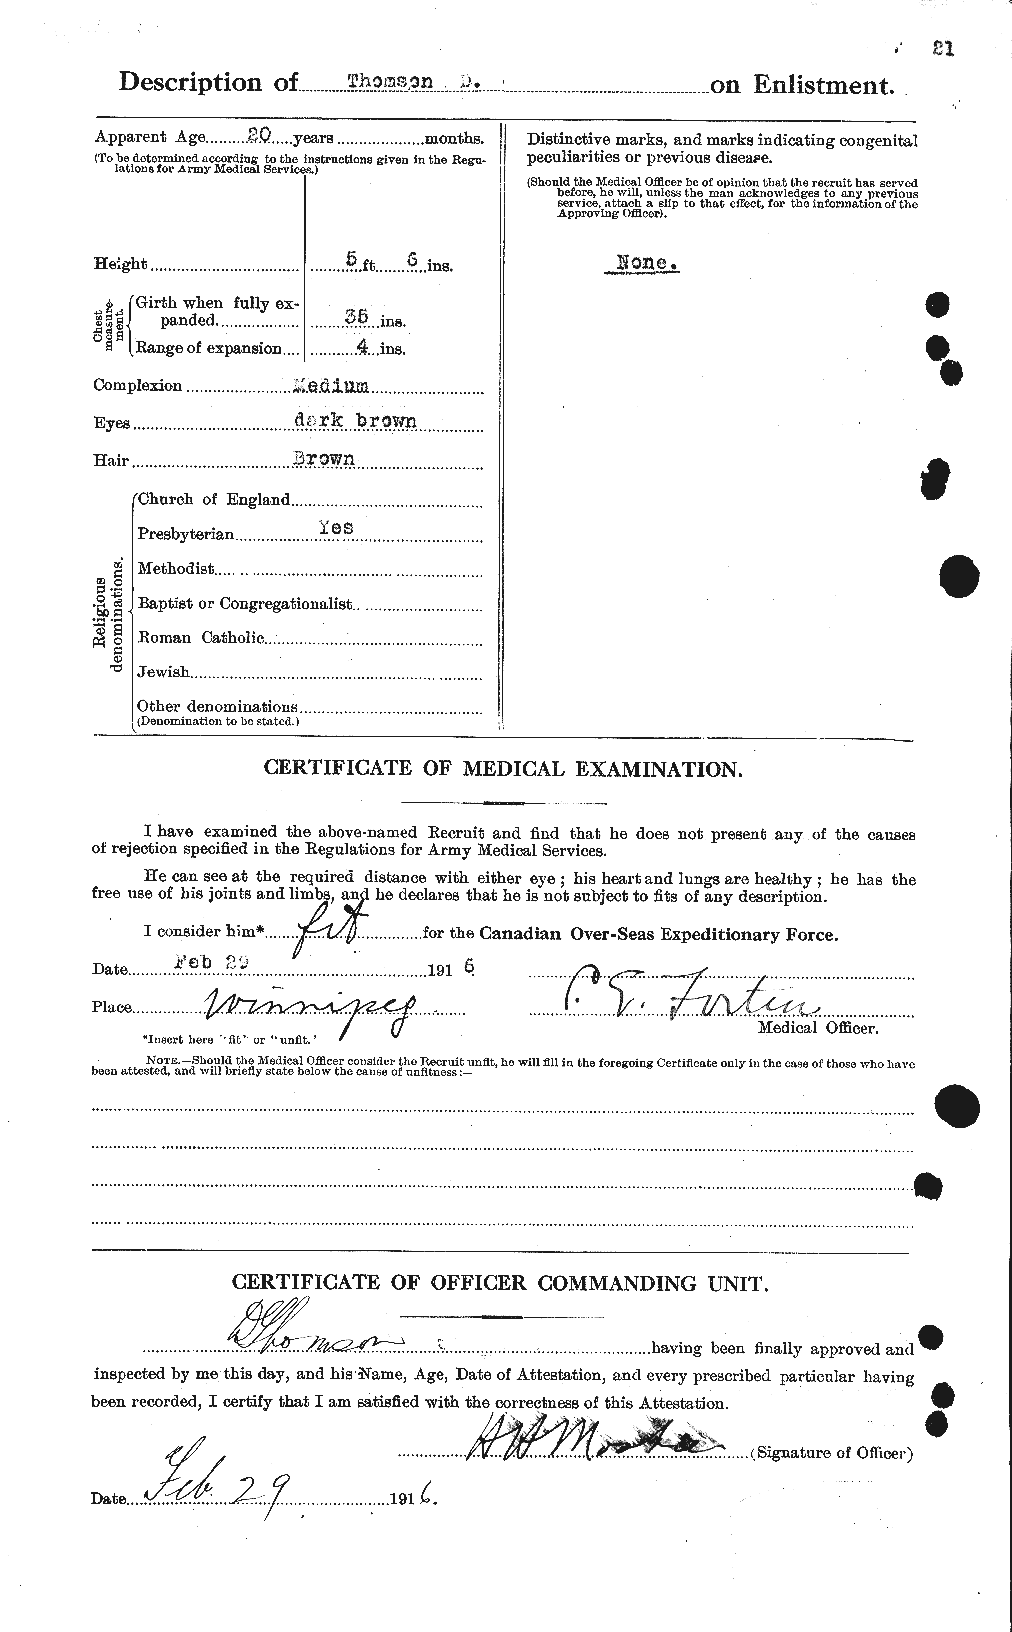 Personnel Records of the First World War - CEF 633617b